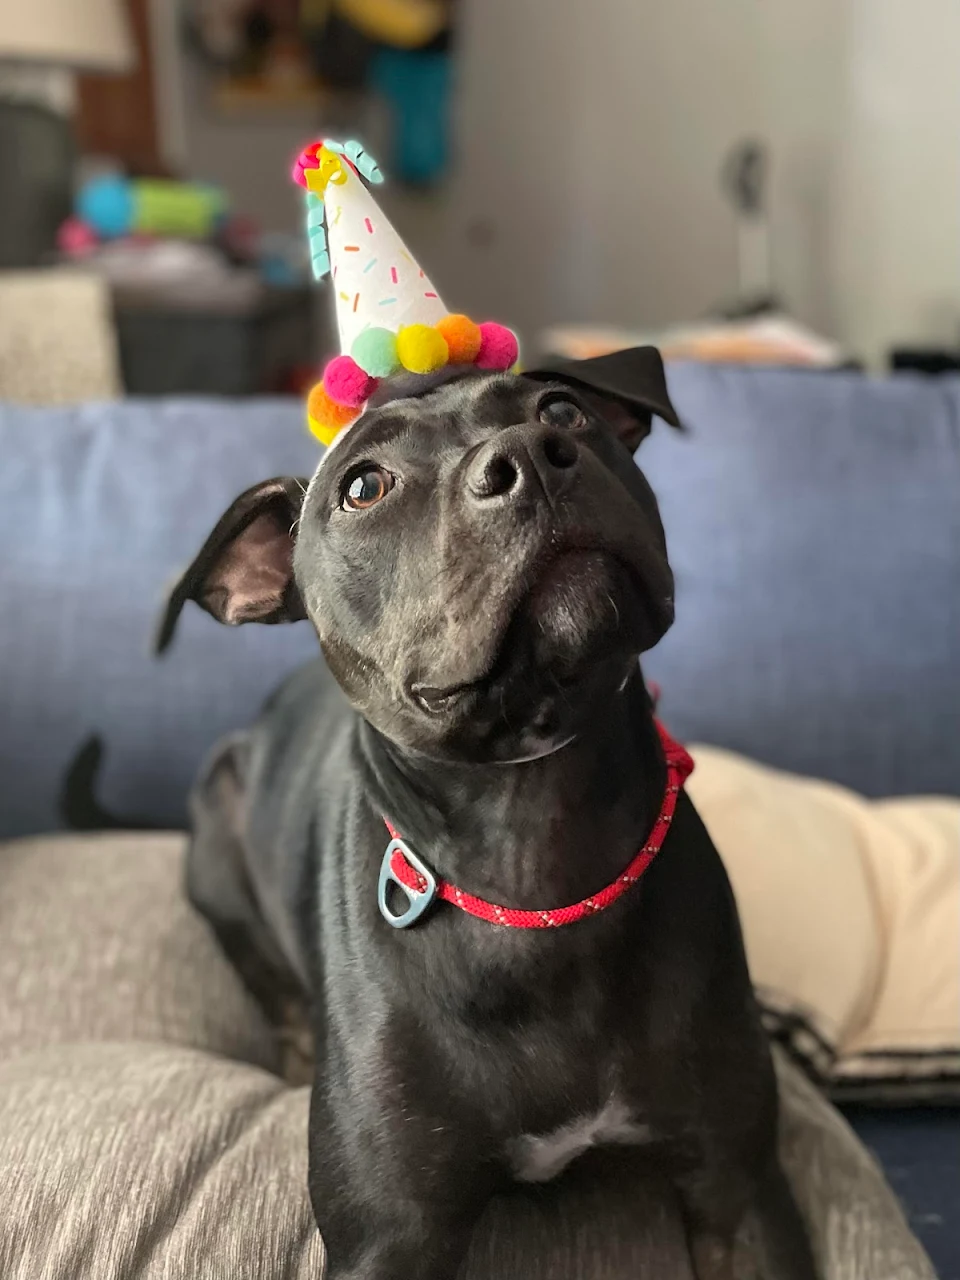 Our little babe turns 1 today. We couldn’t have gotten luckier adopting her from the shelter. [OC]